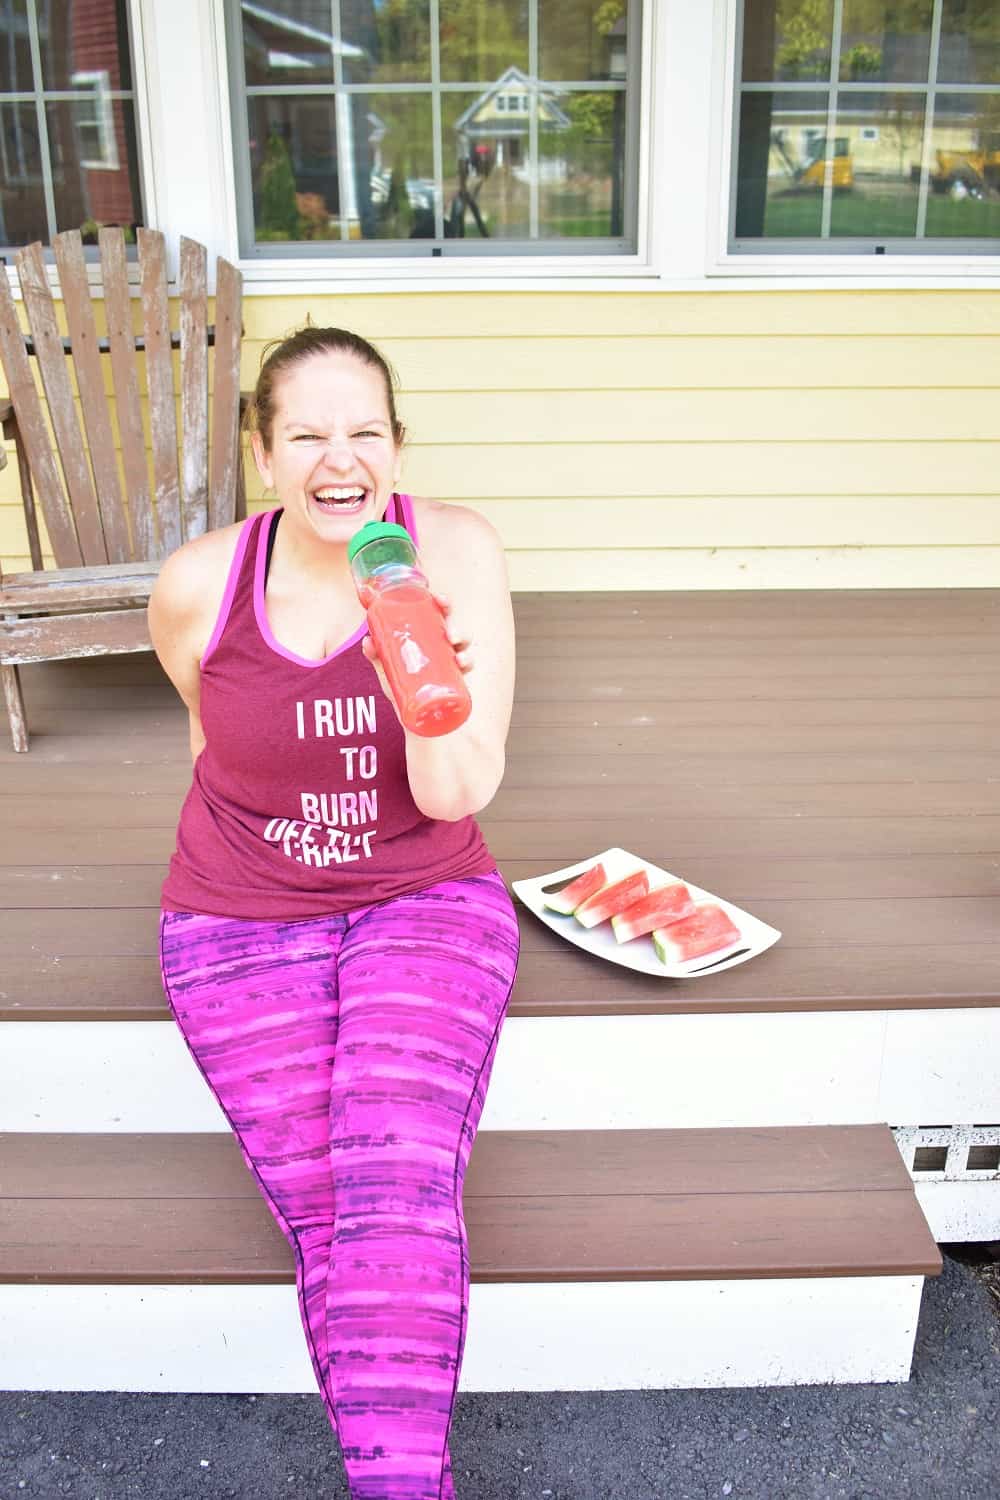 Chrissy Carroll ingesting a homemade sports drink  Watermelon House made Sports activities Drink Watermelon Sports Drink 7